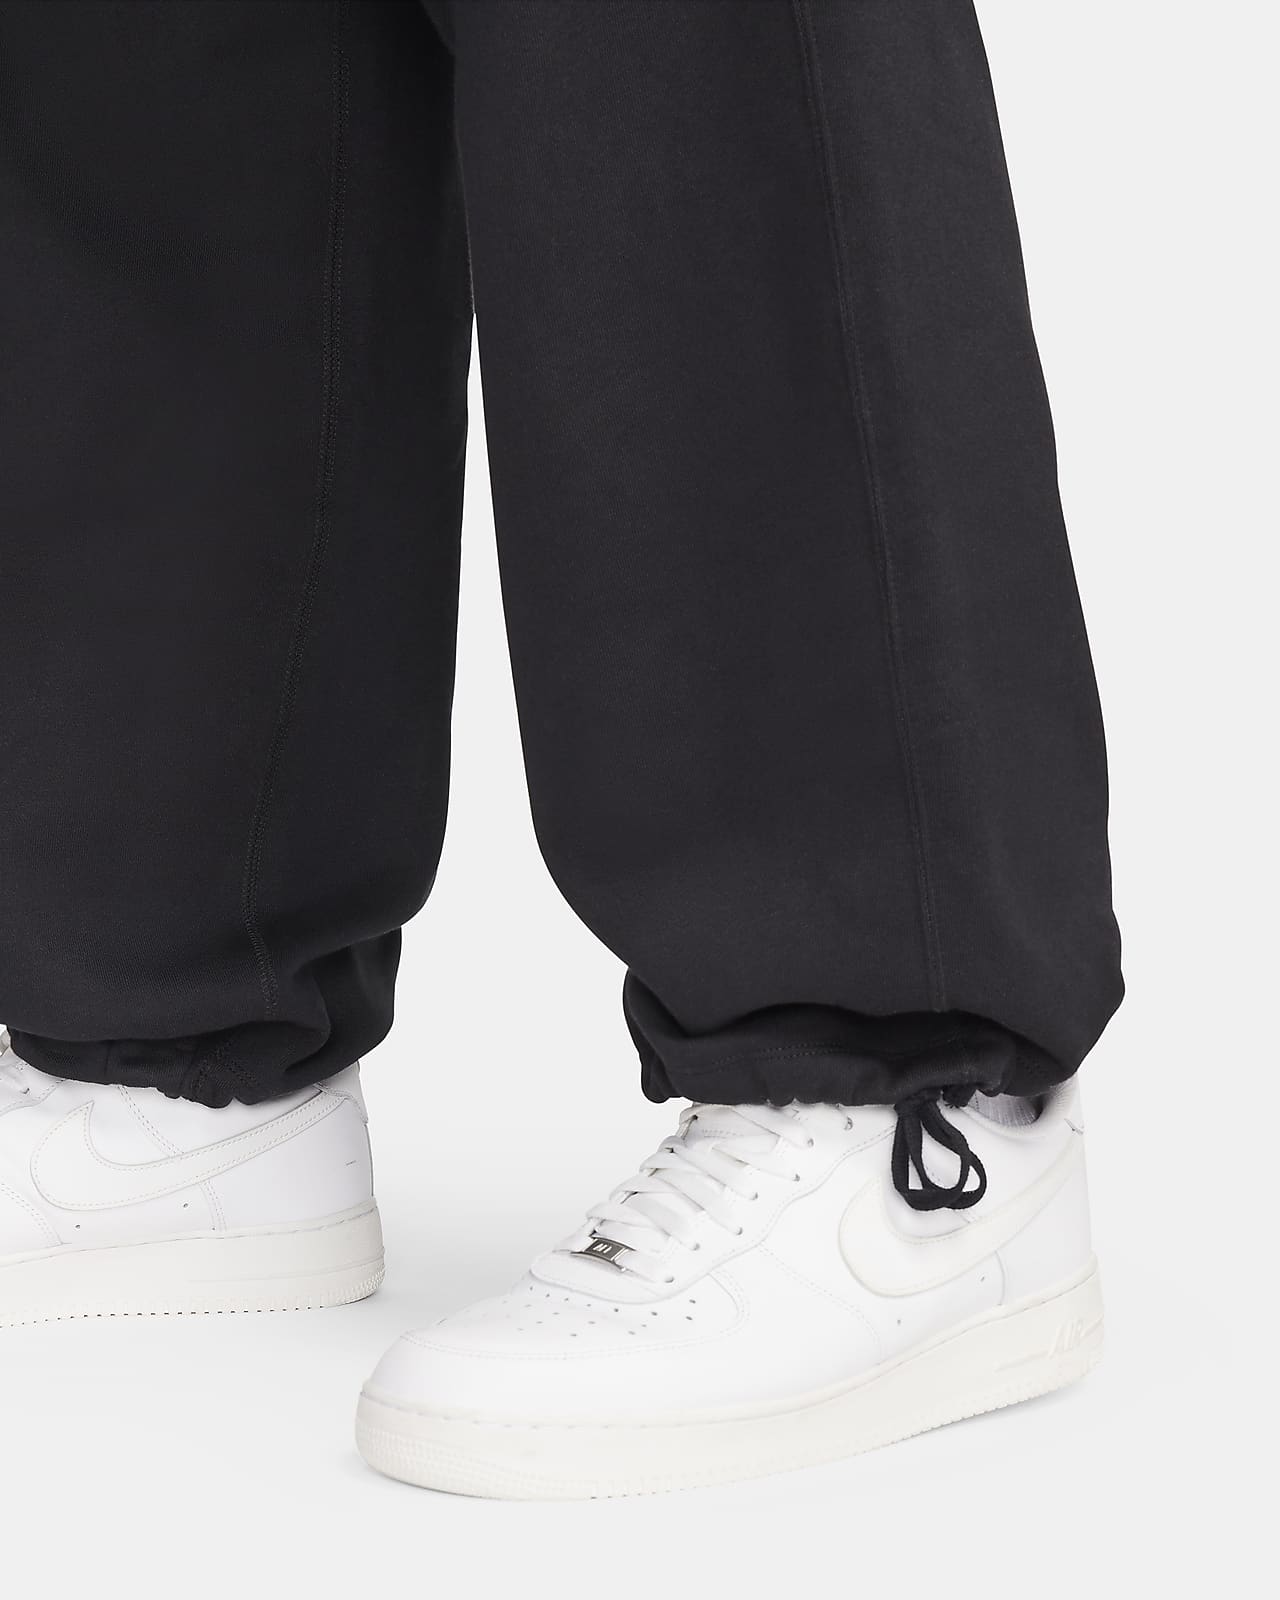 Order NIKE Solo Swoosh Club Fleece Pant midnight navy/white Pants from  solebox